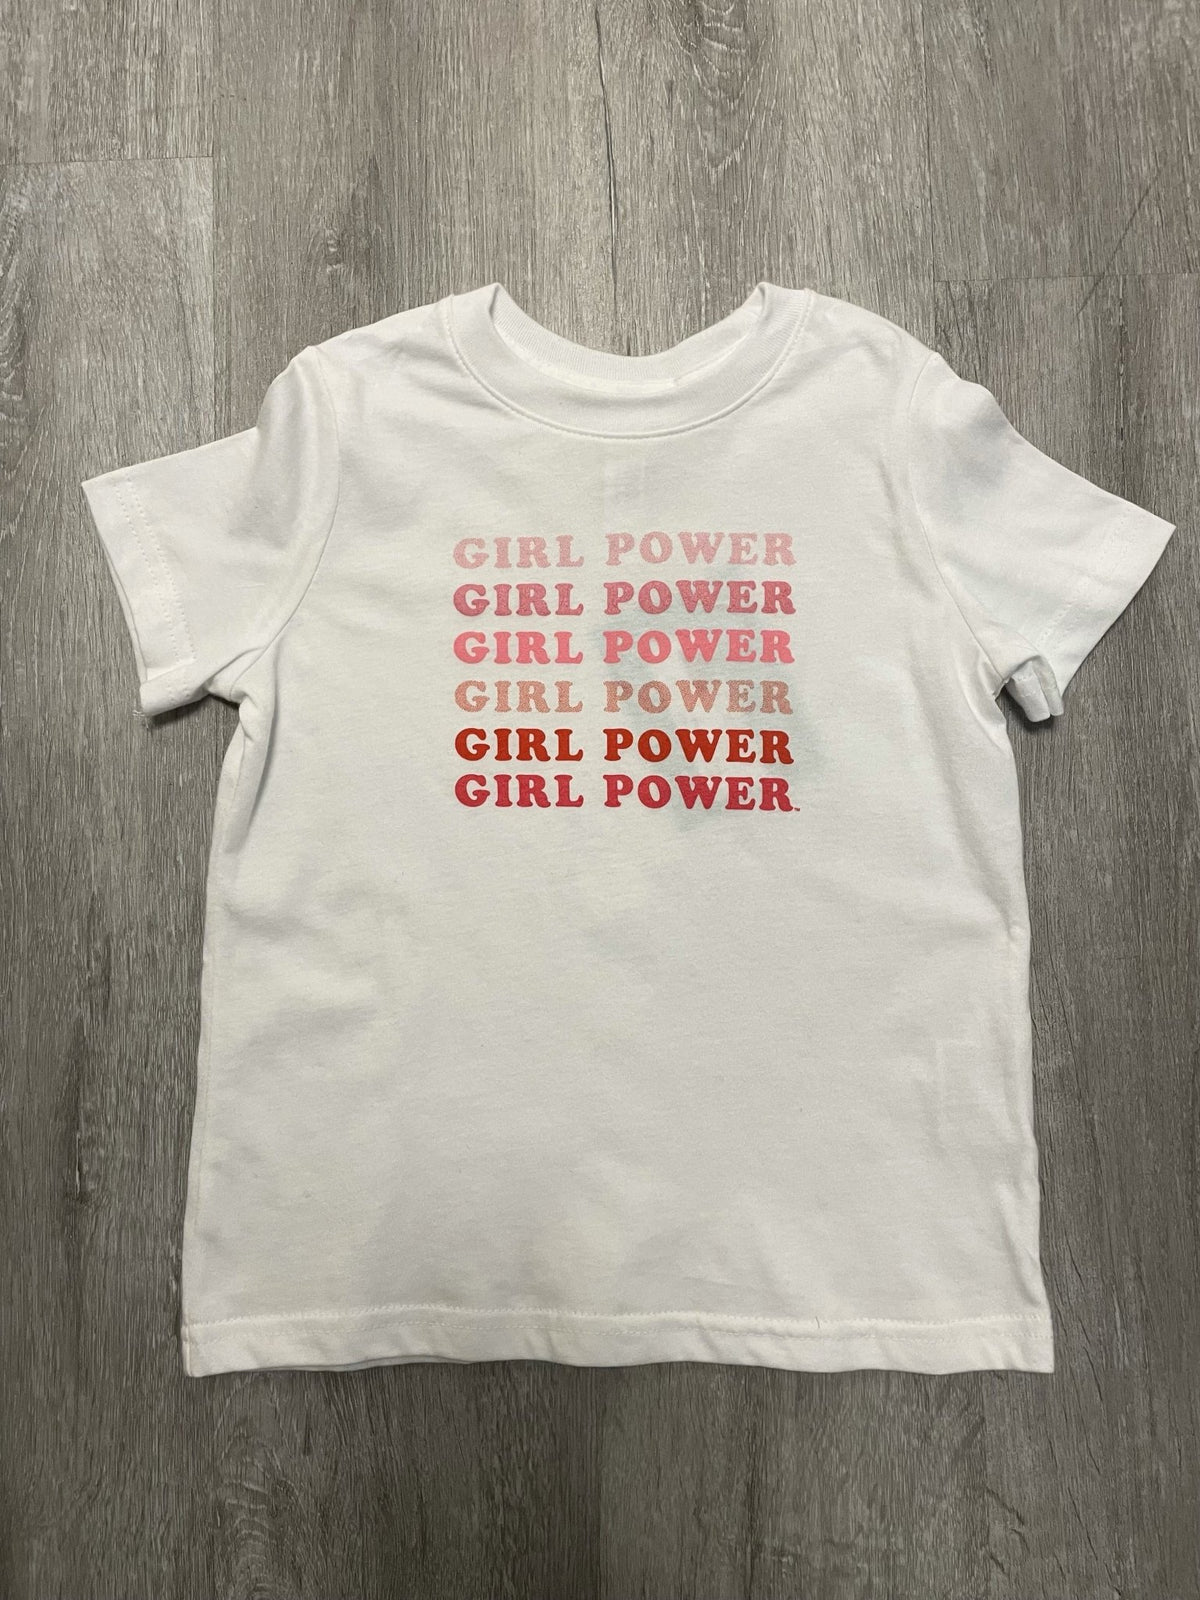 KIDS girl power t-shirt white - Stylish T-shirts - Cute Mommy and Me Apparel at Lush Fashion Lounge Boutique in Oklahoma